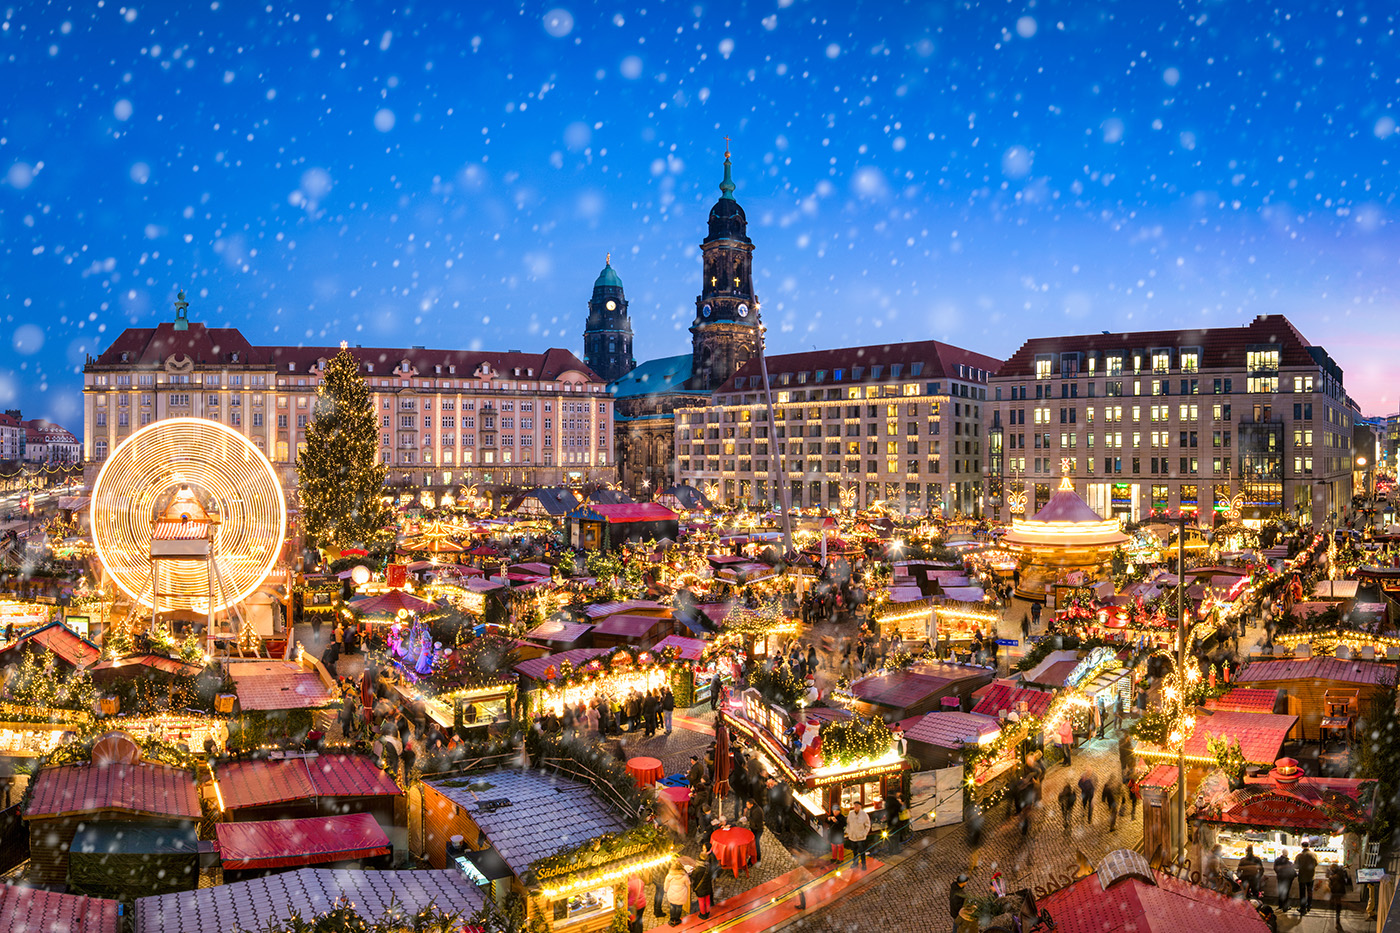 The Oldest and Most Iconic Striezelmarkt in Dresden Christmas Market